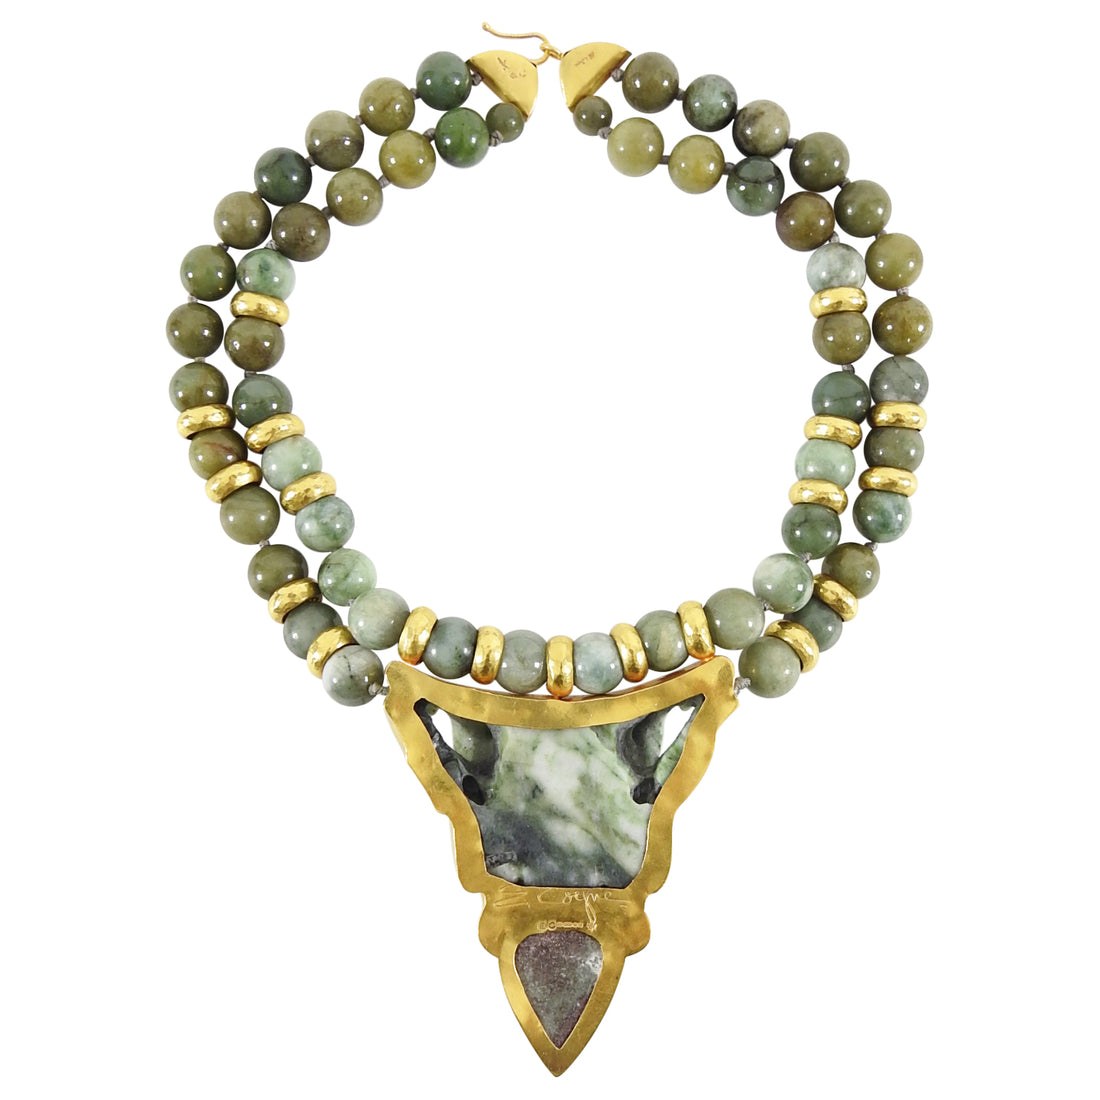 Eileen Coyne 22k Gold and Carved Jade Bead Pendant Necklace